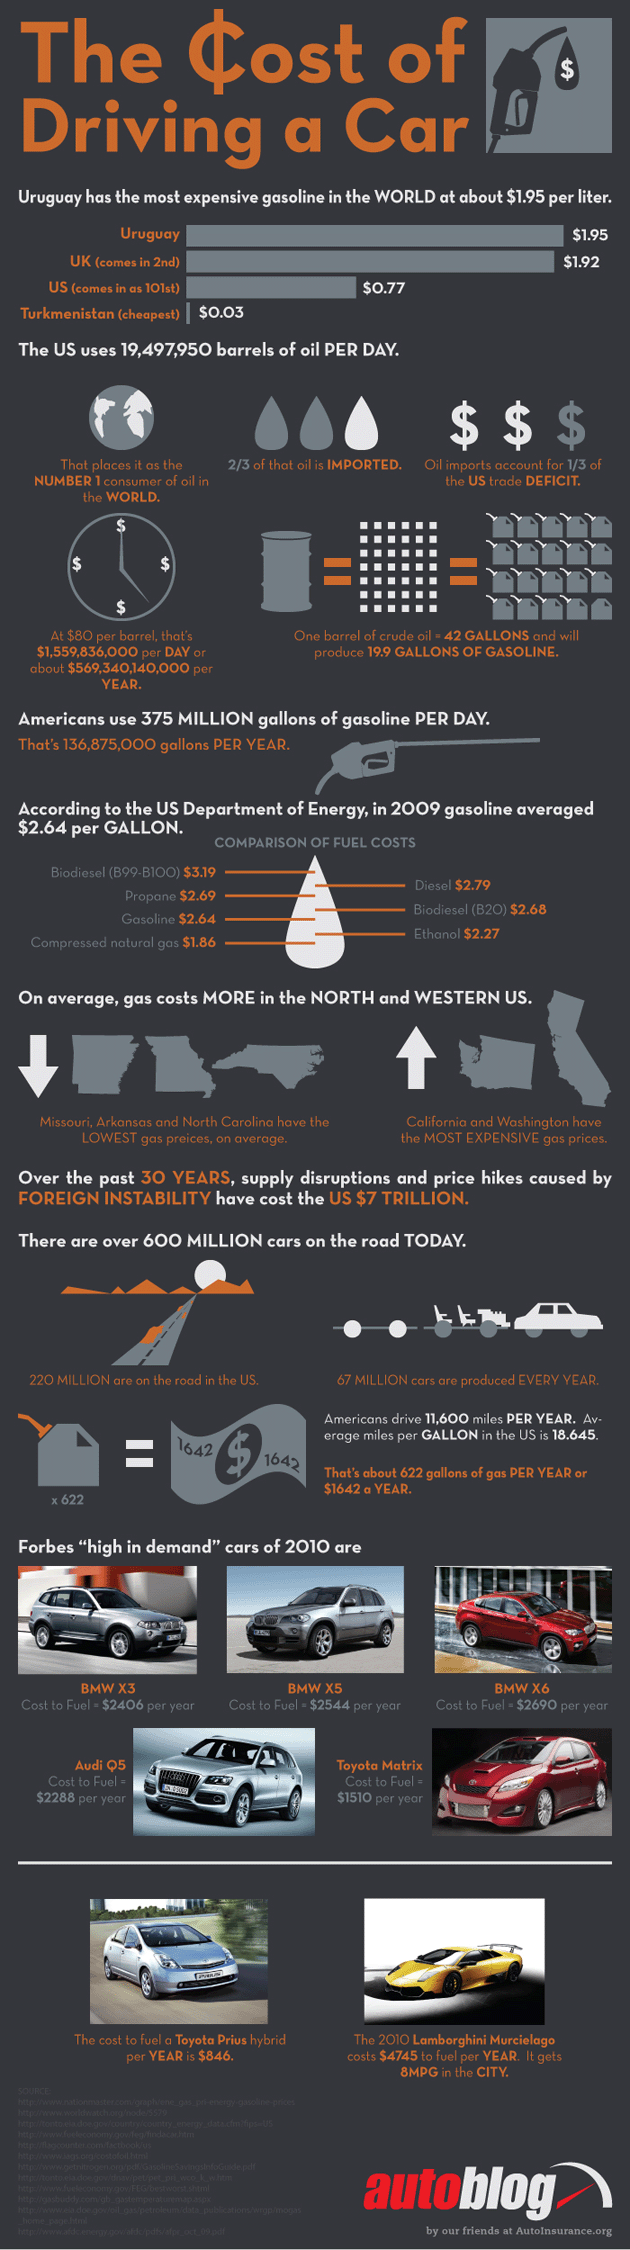 The cost of driving a car